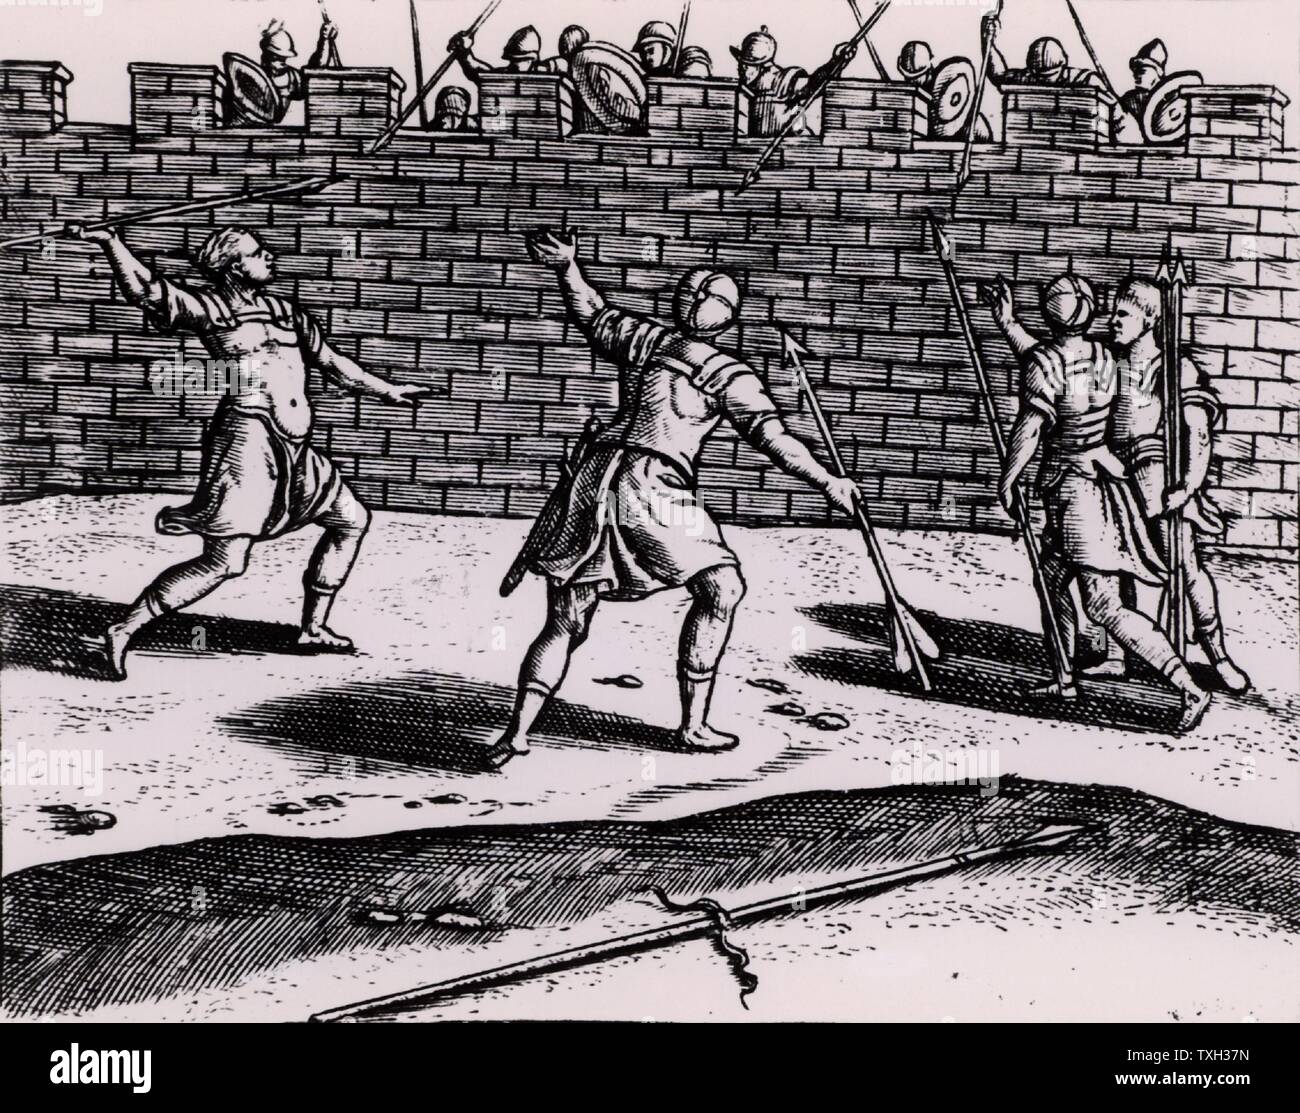 Roman spearmen attacking the walls of a besieged fortress.   From "Poliorceticon sive de machinis tormentis telis" by Justus Lipsius (Joost Lips) (Antwerp, 1605). Engraving. Stock Photo